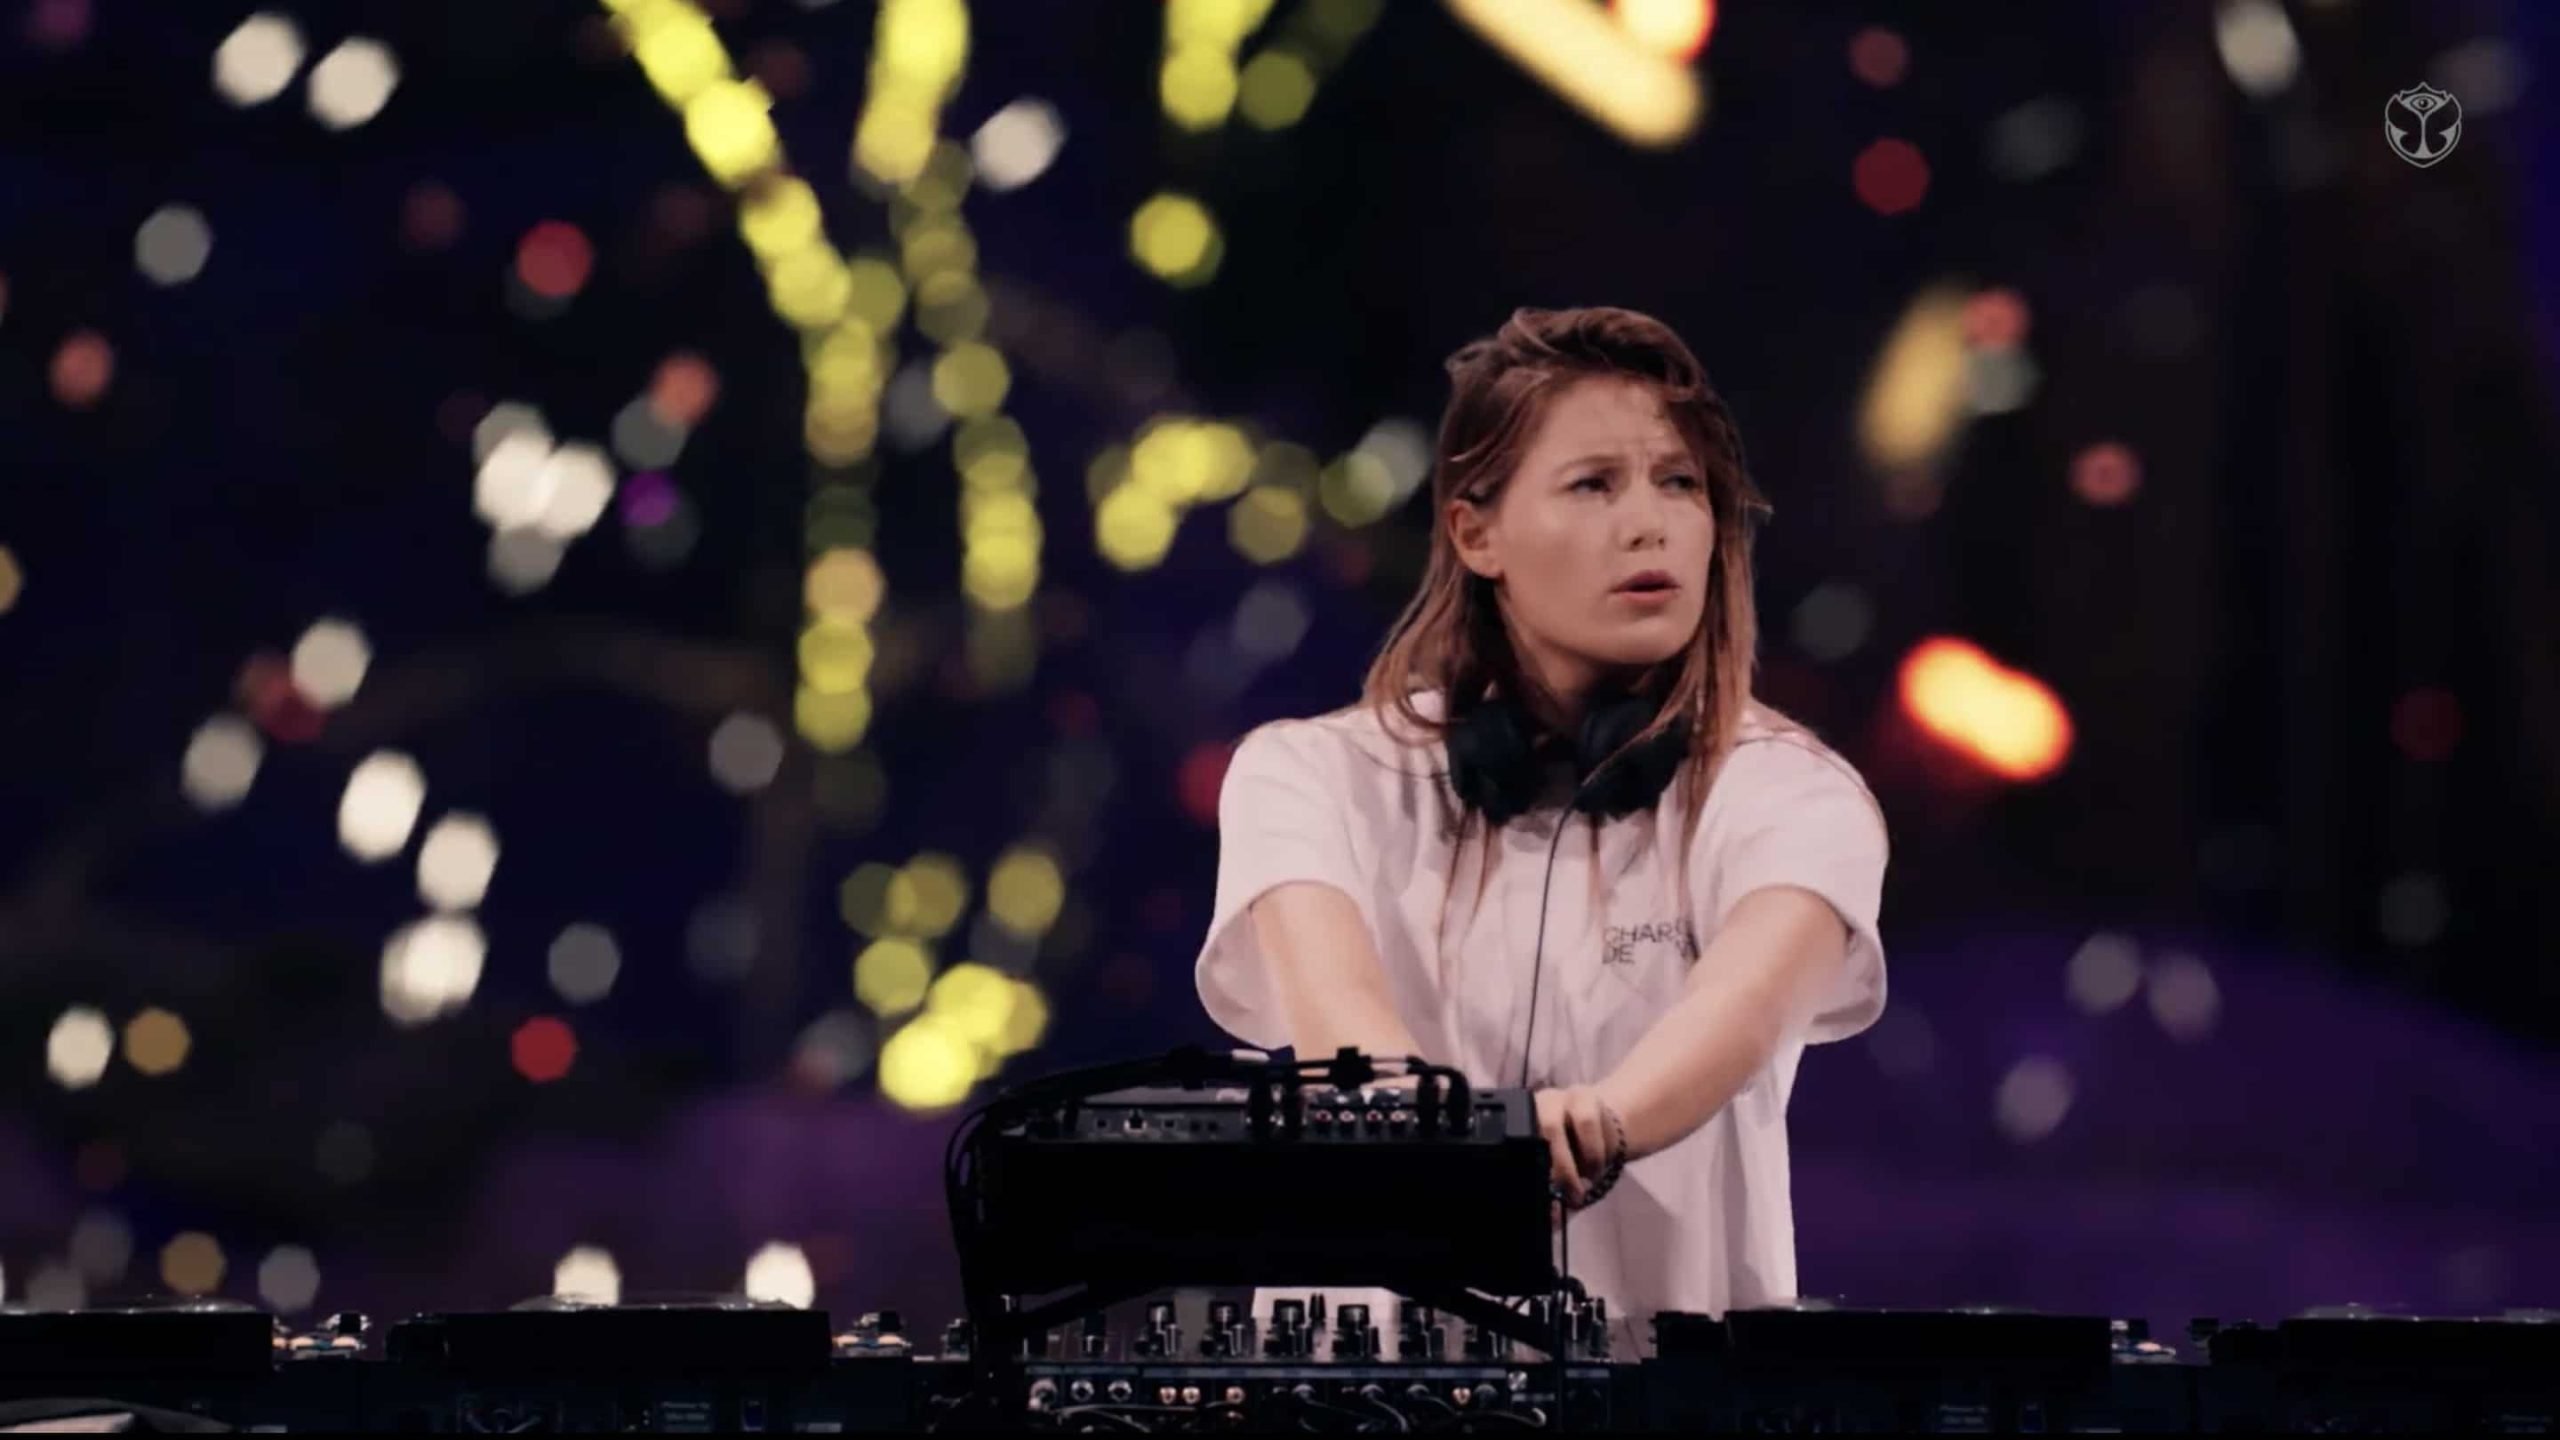 Charlotte de Witte shares new music with acidic Tomorrowland New Year’s Eve performance